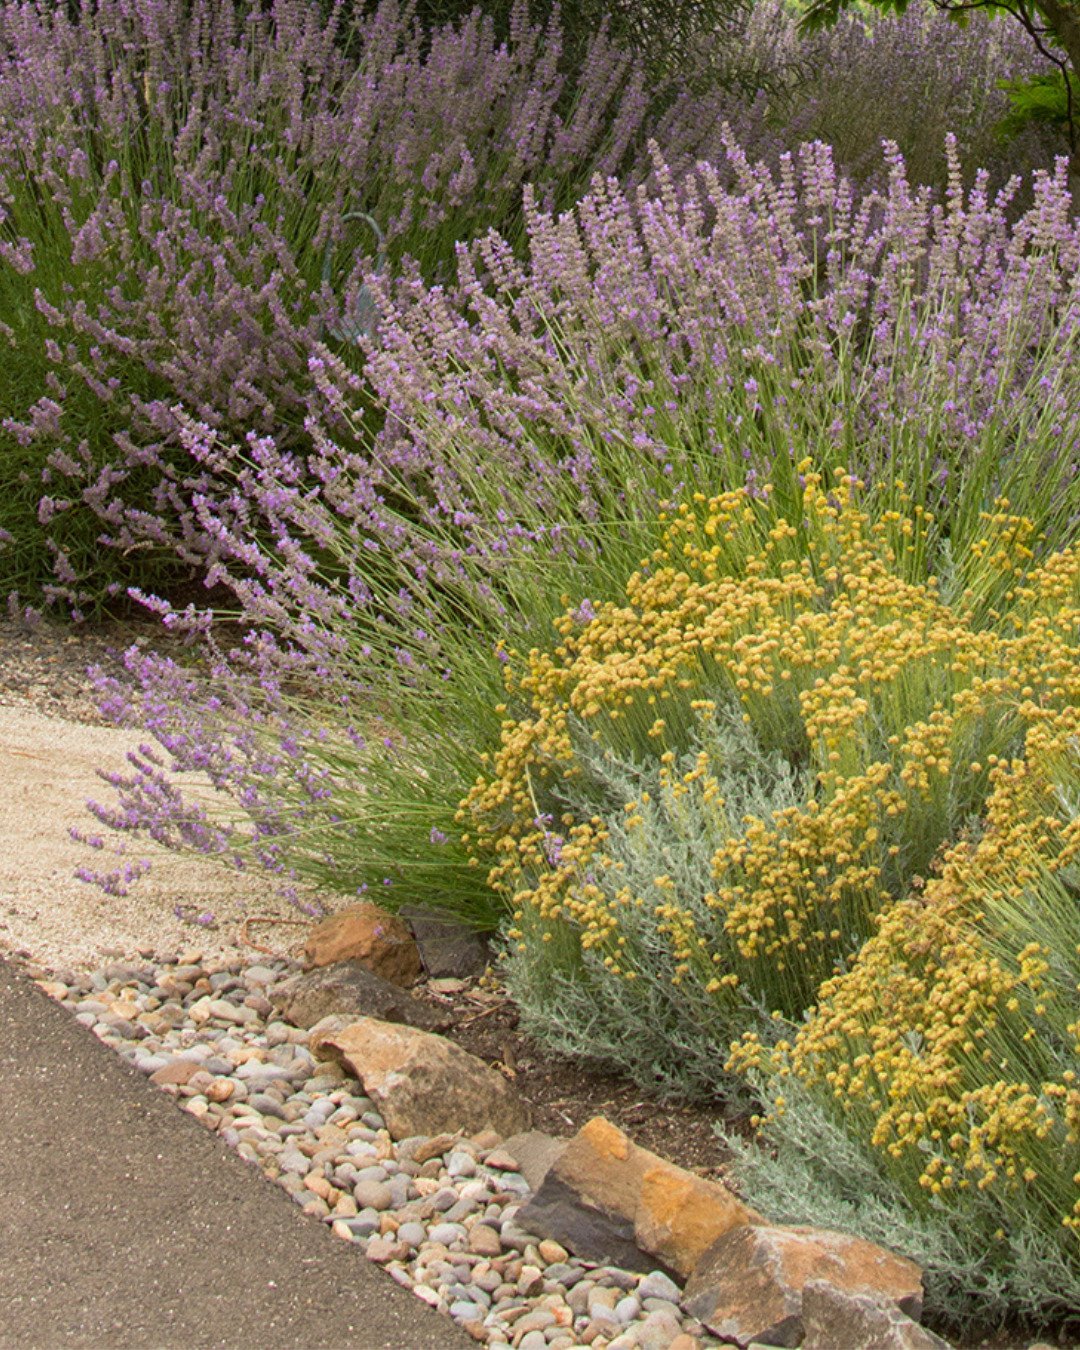 Three ways to love your lavender this summer:
💜 Pair them with the right partners - other heat-loving plants like this lavender cotton (Santolina) that also love the reflected heat of the rock mulch make a happy combo.
💜 Give them space - lavender 